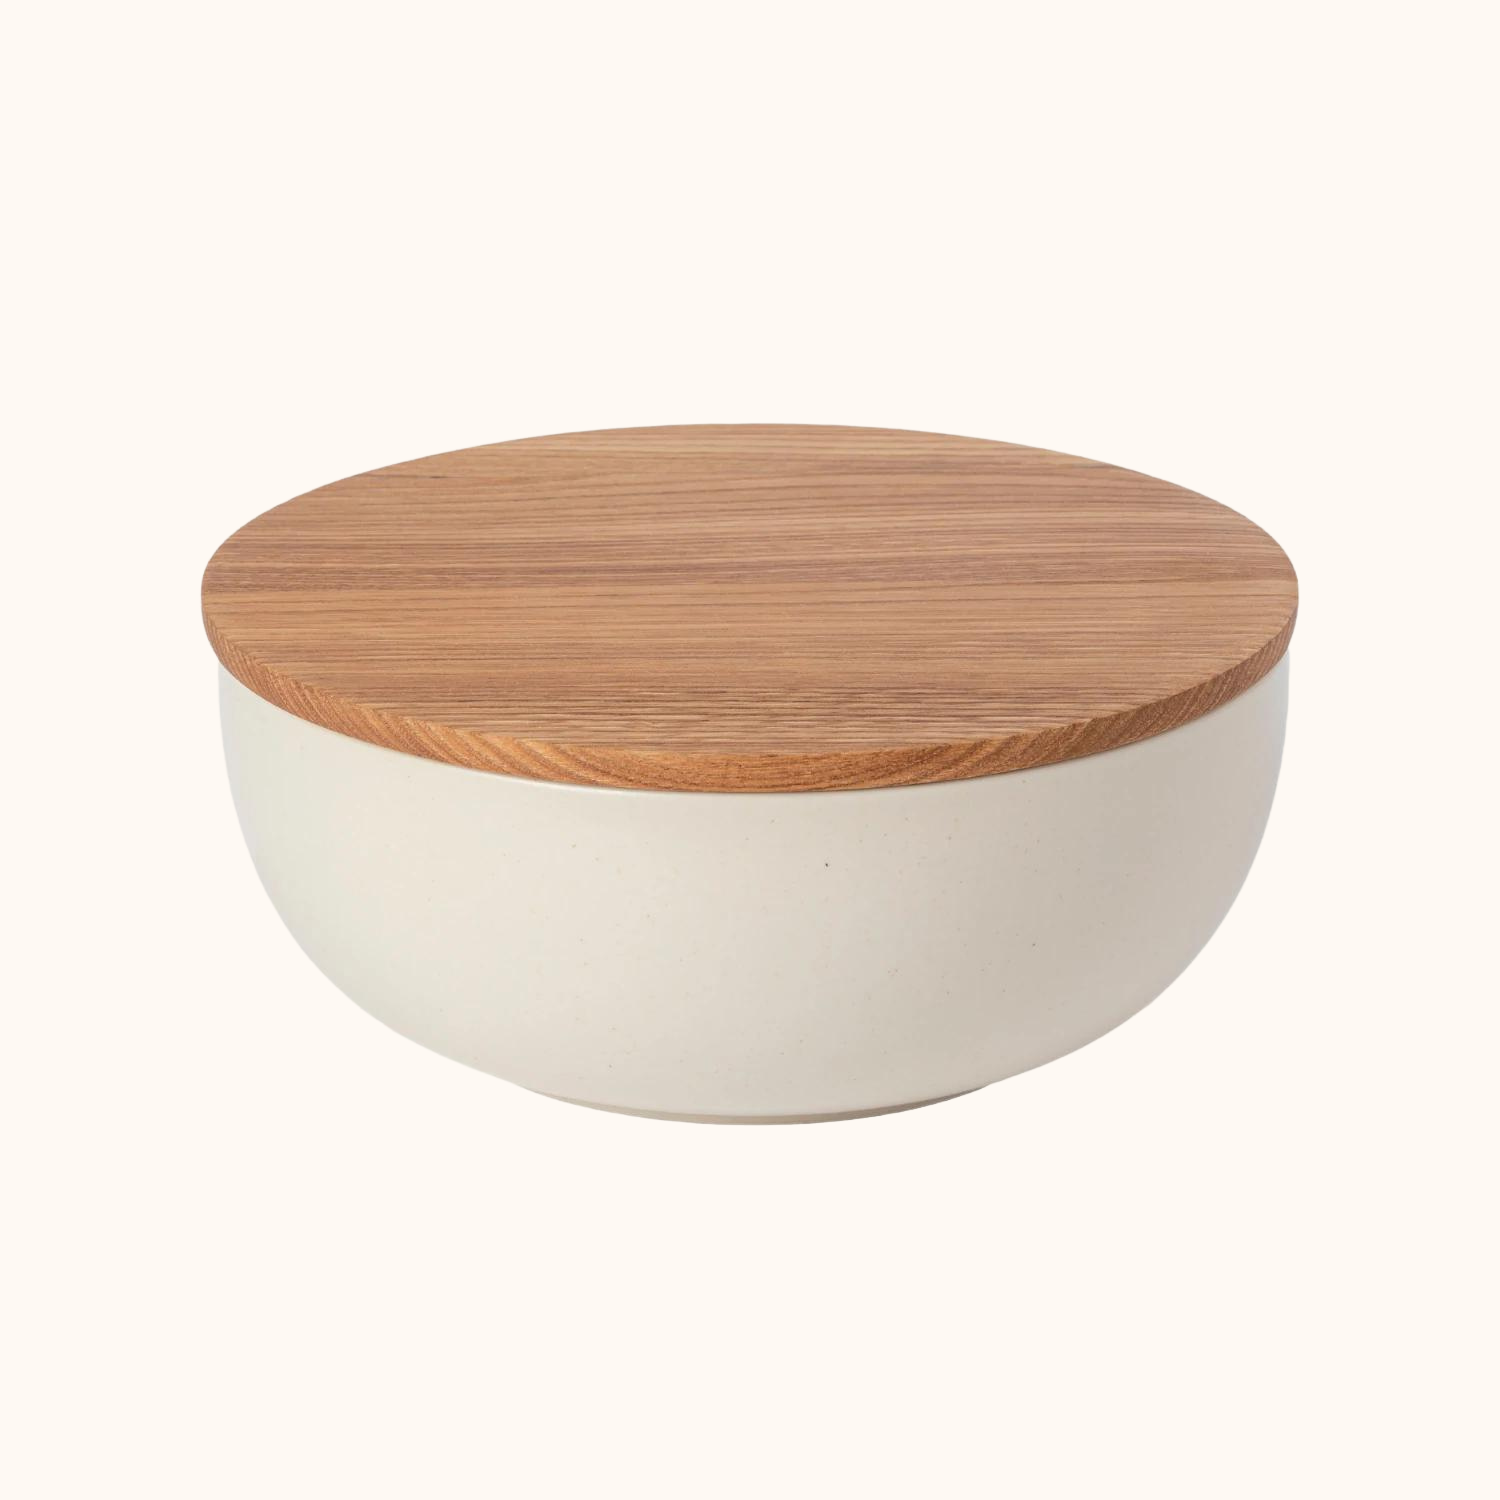 https://cdn.shopify.com/s/files/1/0488/9696/6814/products/pacifica-vanilla-serving-bowl-with-oak-lid-10in_1500x.png?v=1652552730